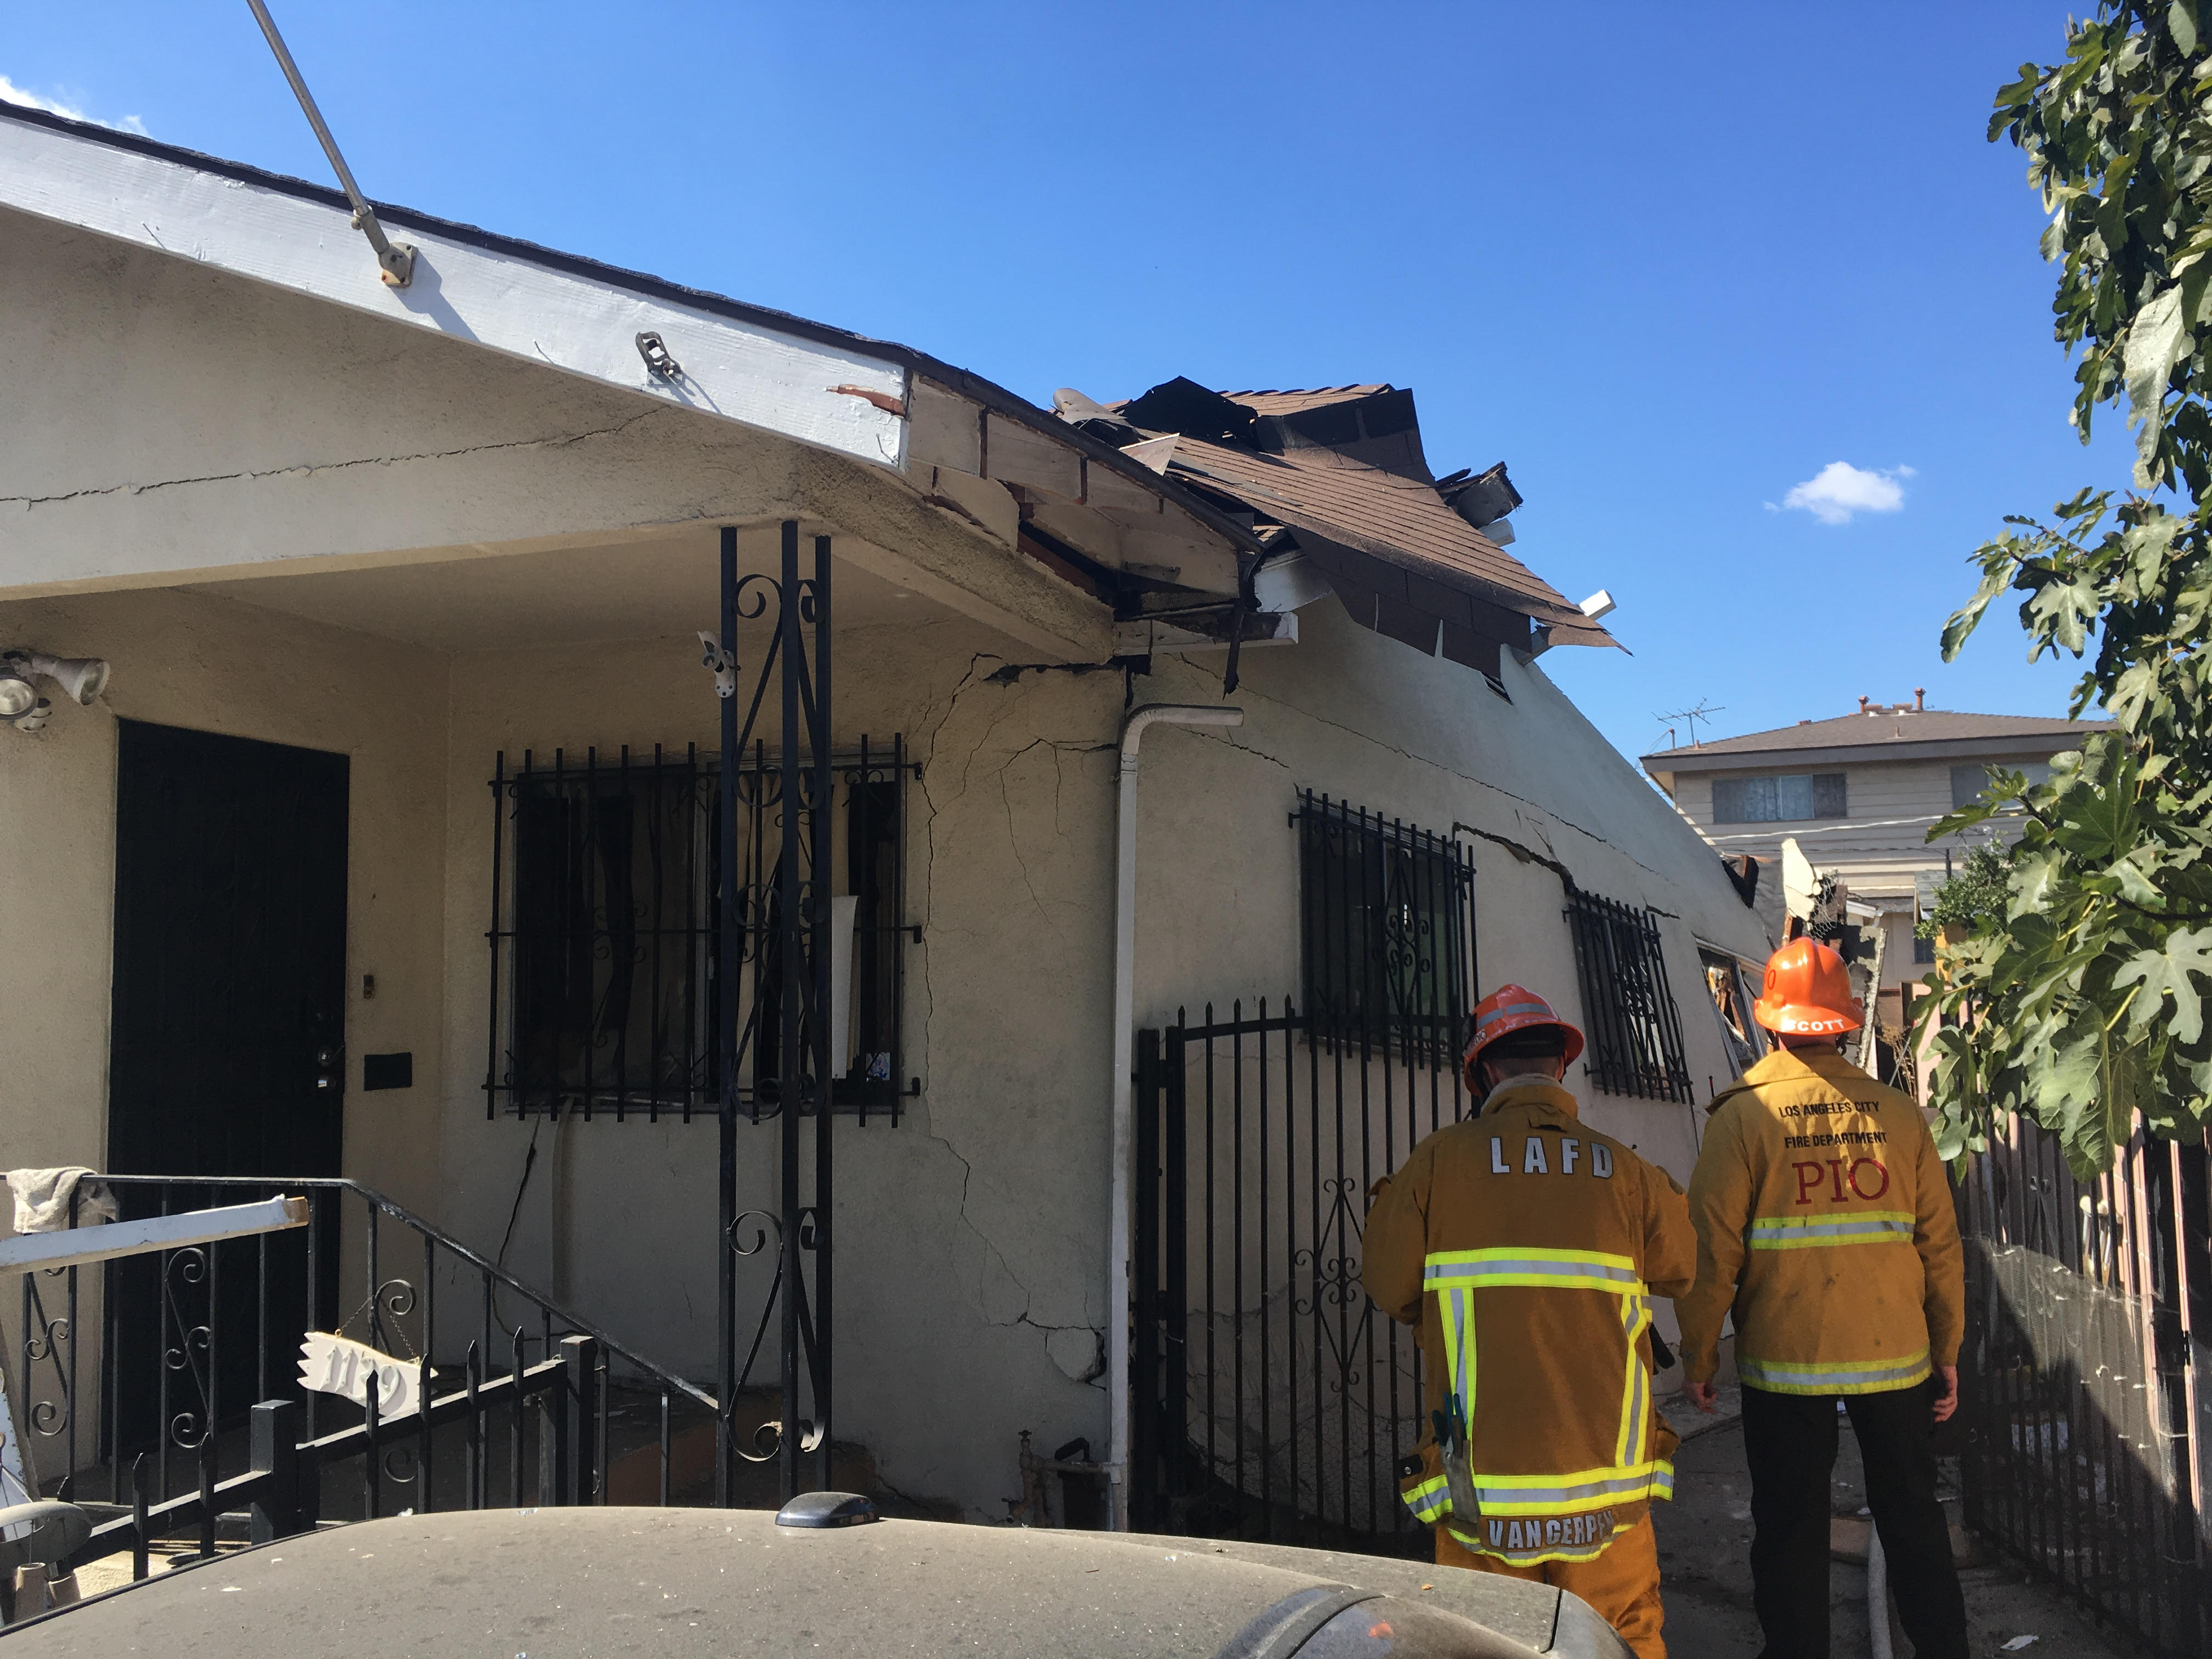 One-story home with significant structural damage from an explosion.